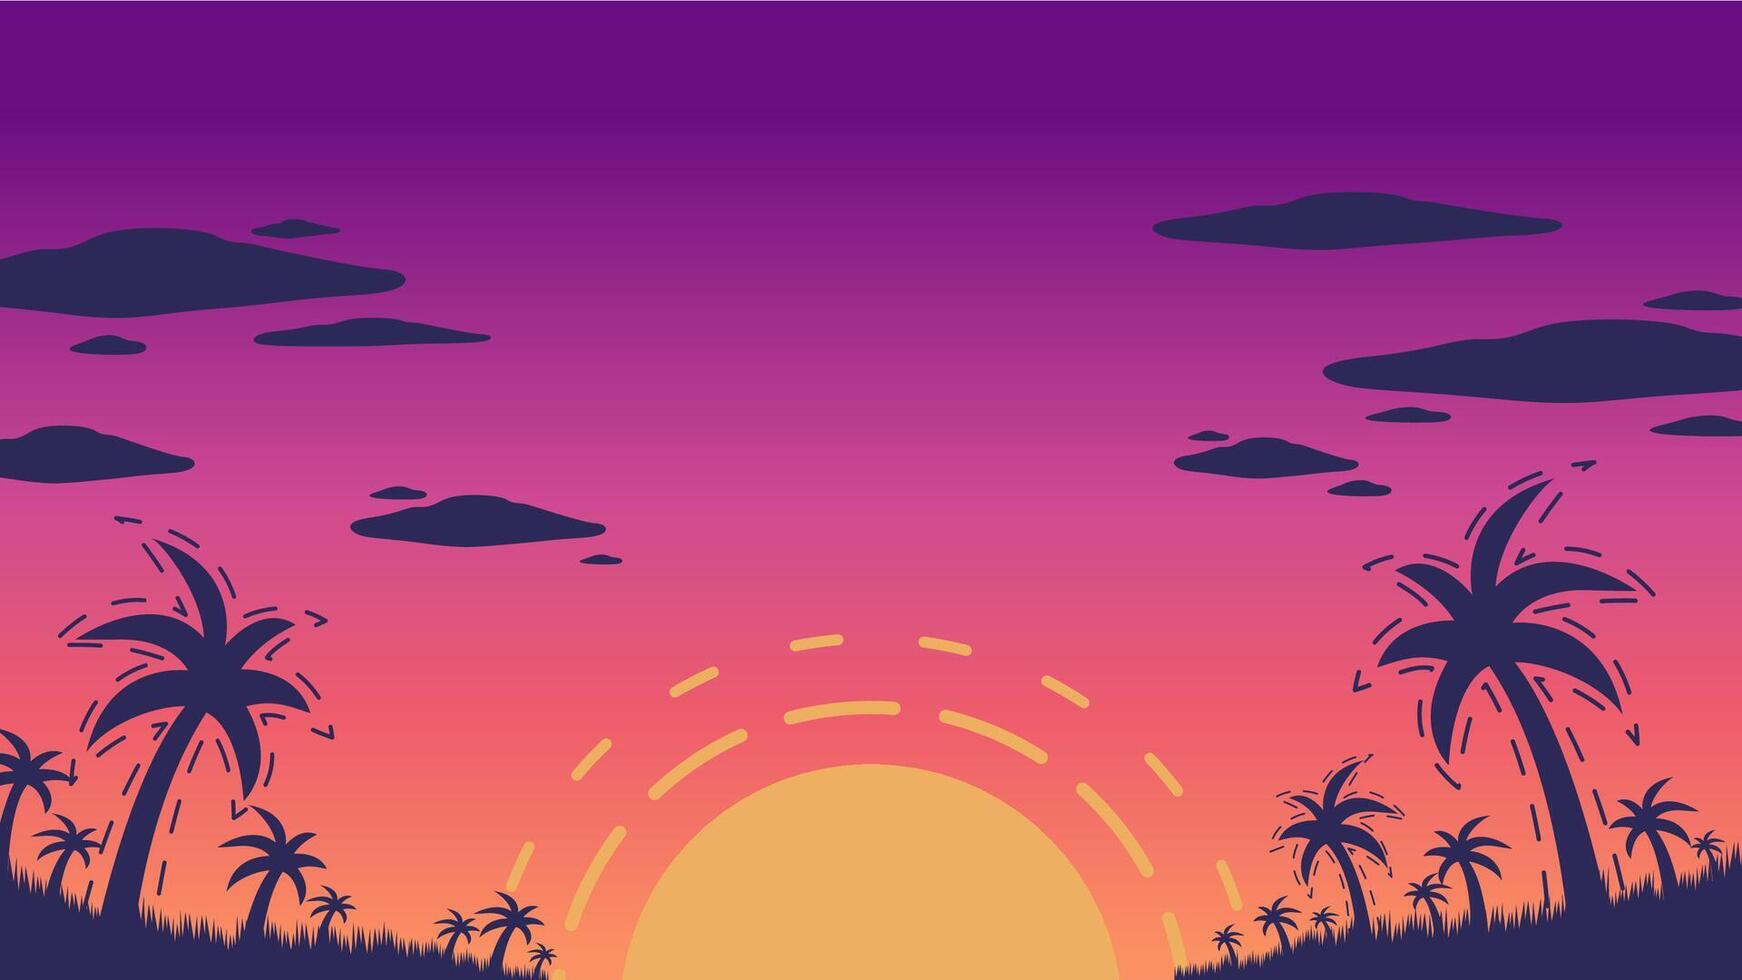 Sunset background with purple and orange sky, big sun in the middle and island with palm, coconut tree in silhouette style vector illustration. Summertime on the beach.